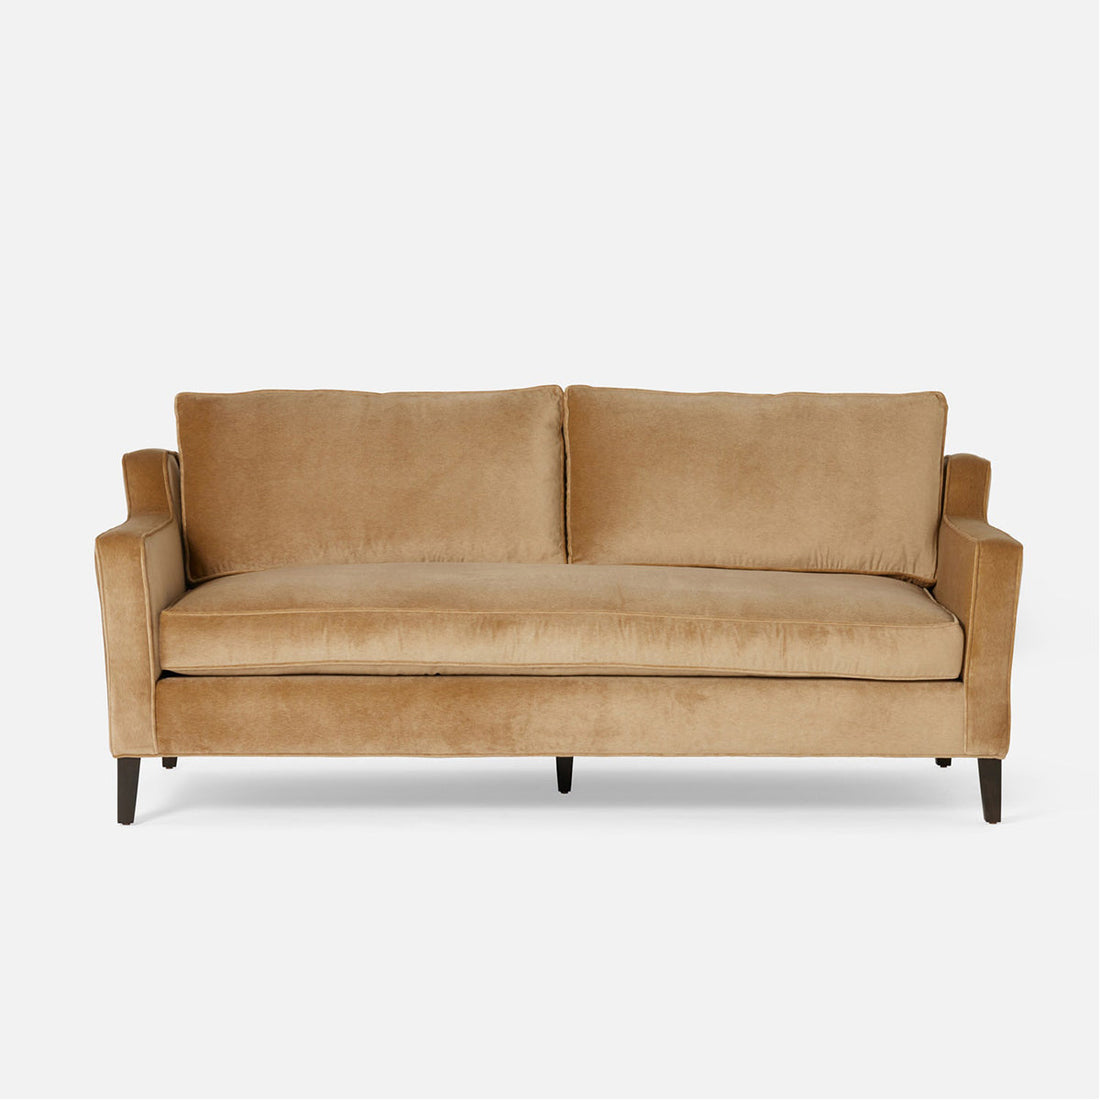 Rowe Furniture By Robin Bruce SYLVIE 88 EXPRESS COCOA LEATHER SOFA